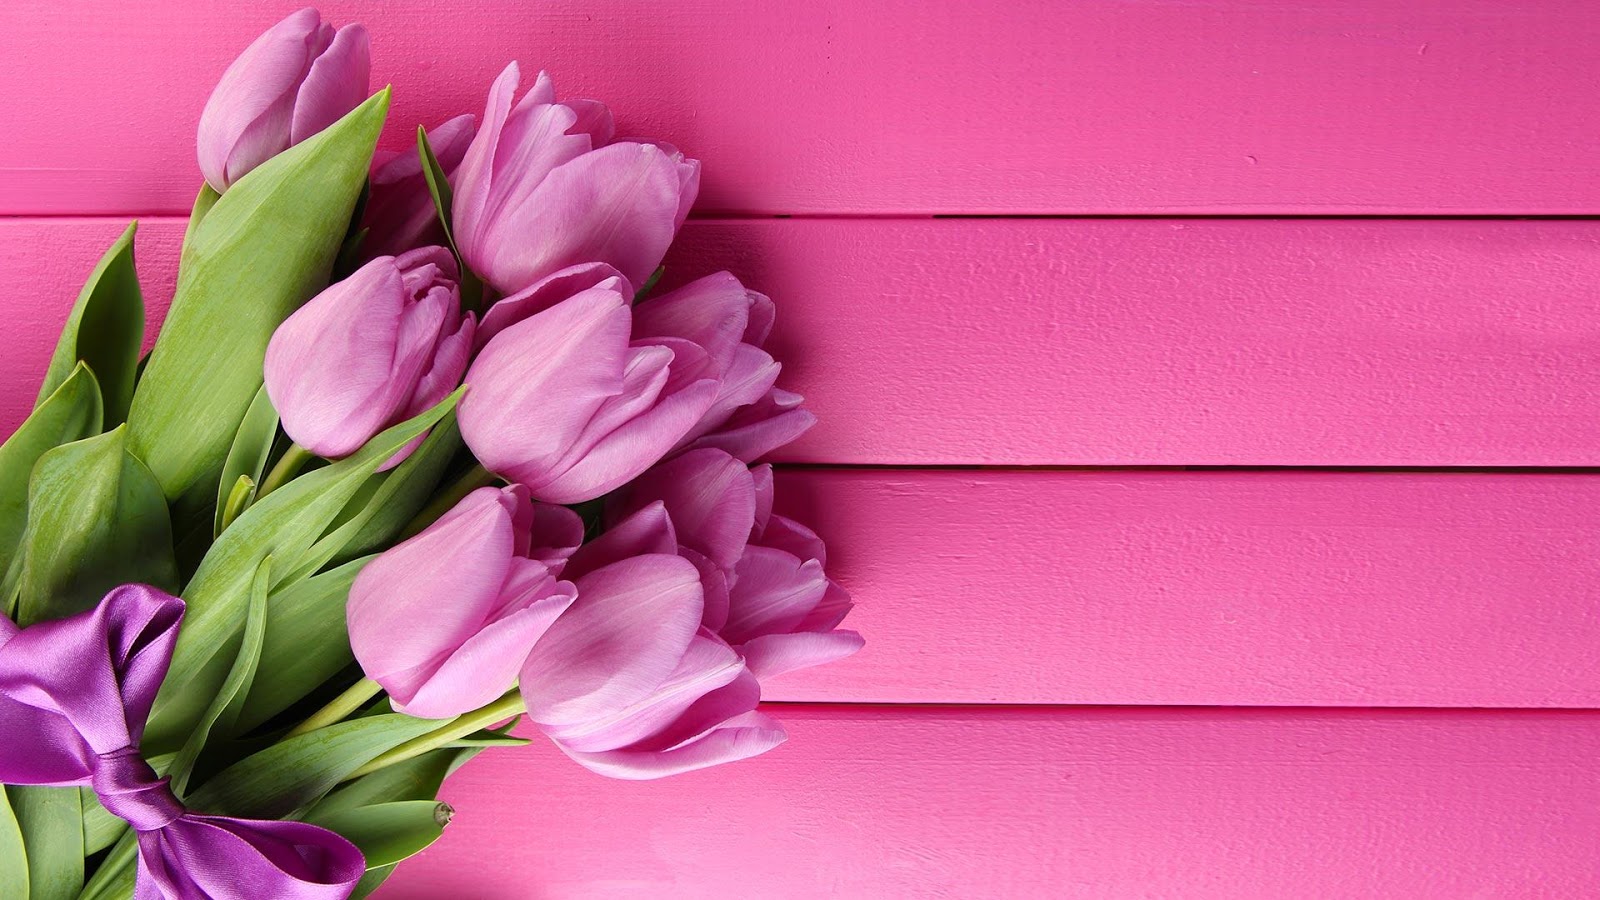 Pink Tulips Live Wallpaper - Android Apps on Google Play